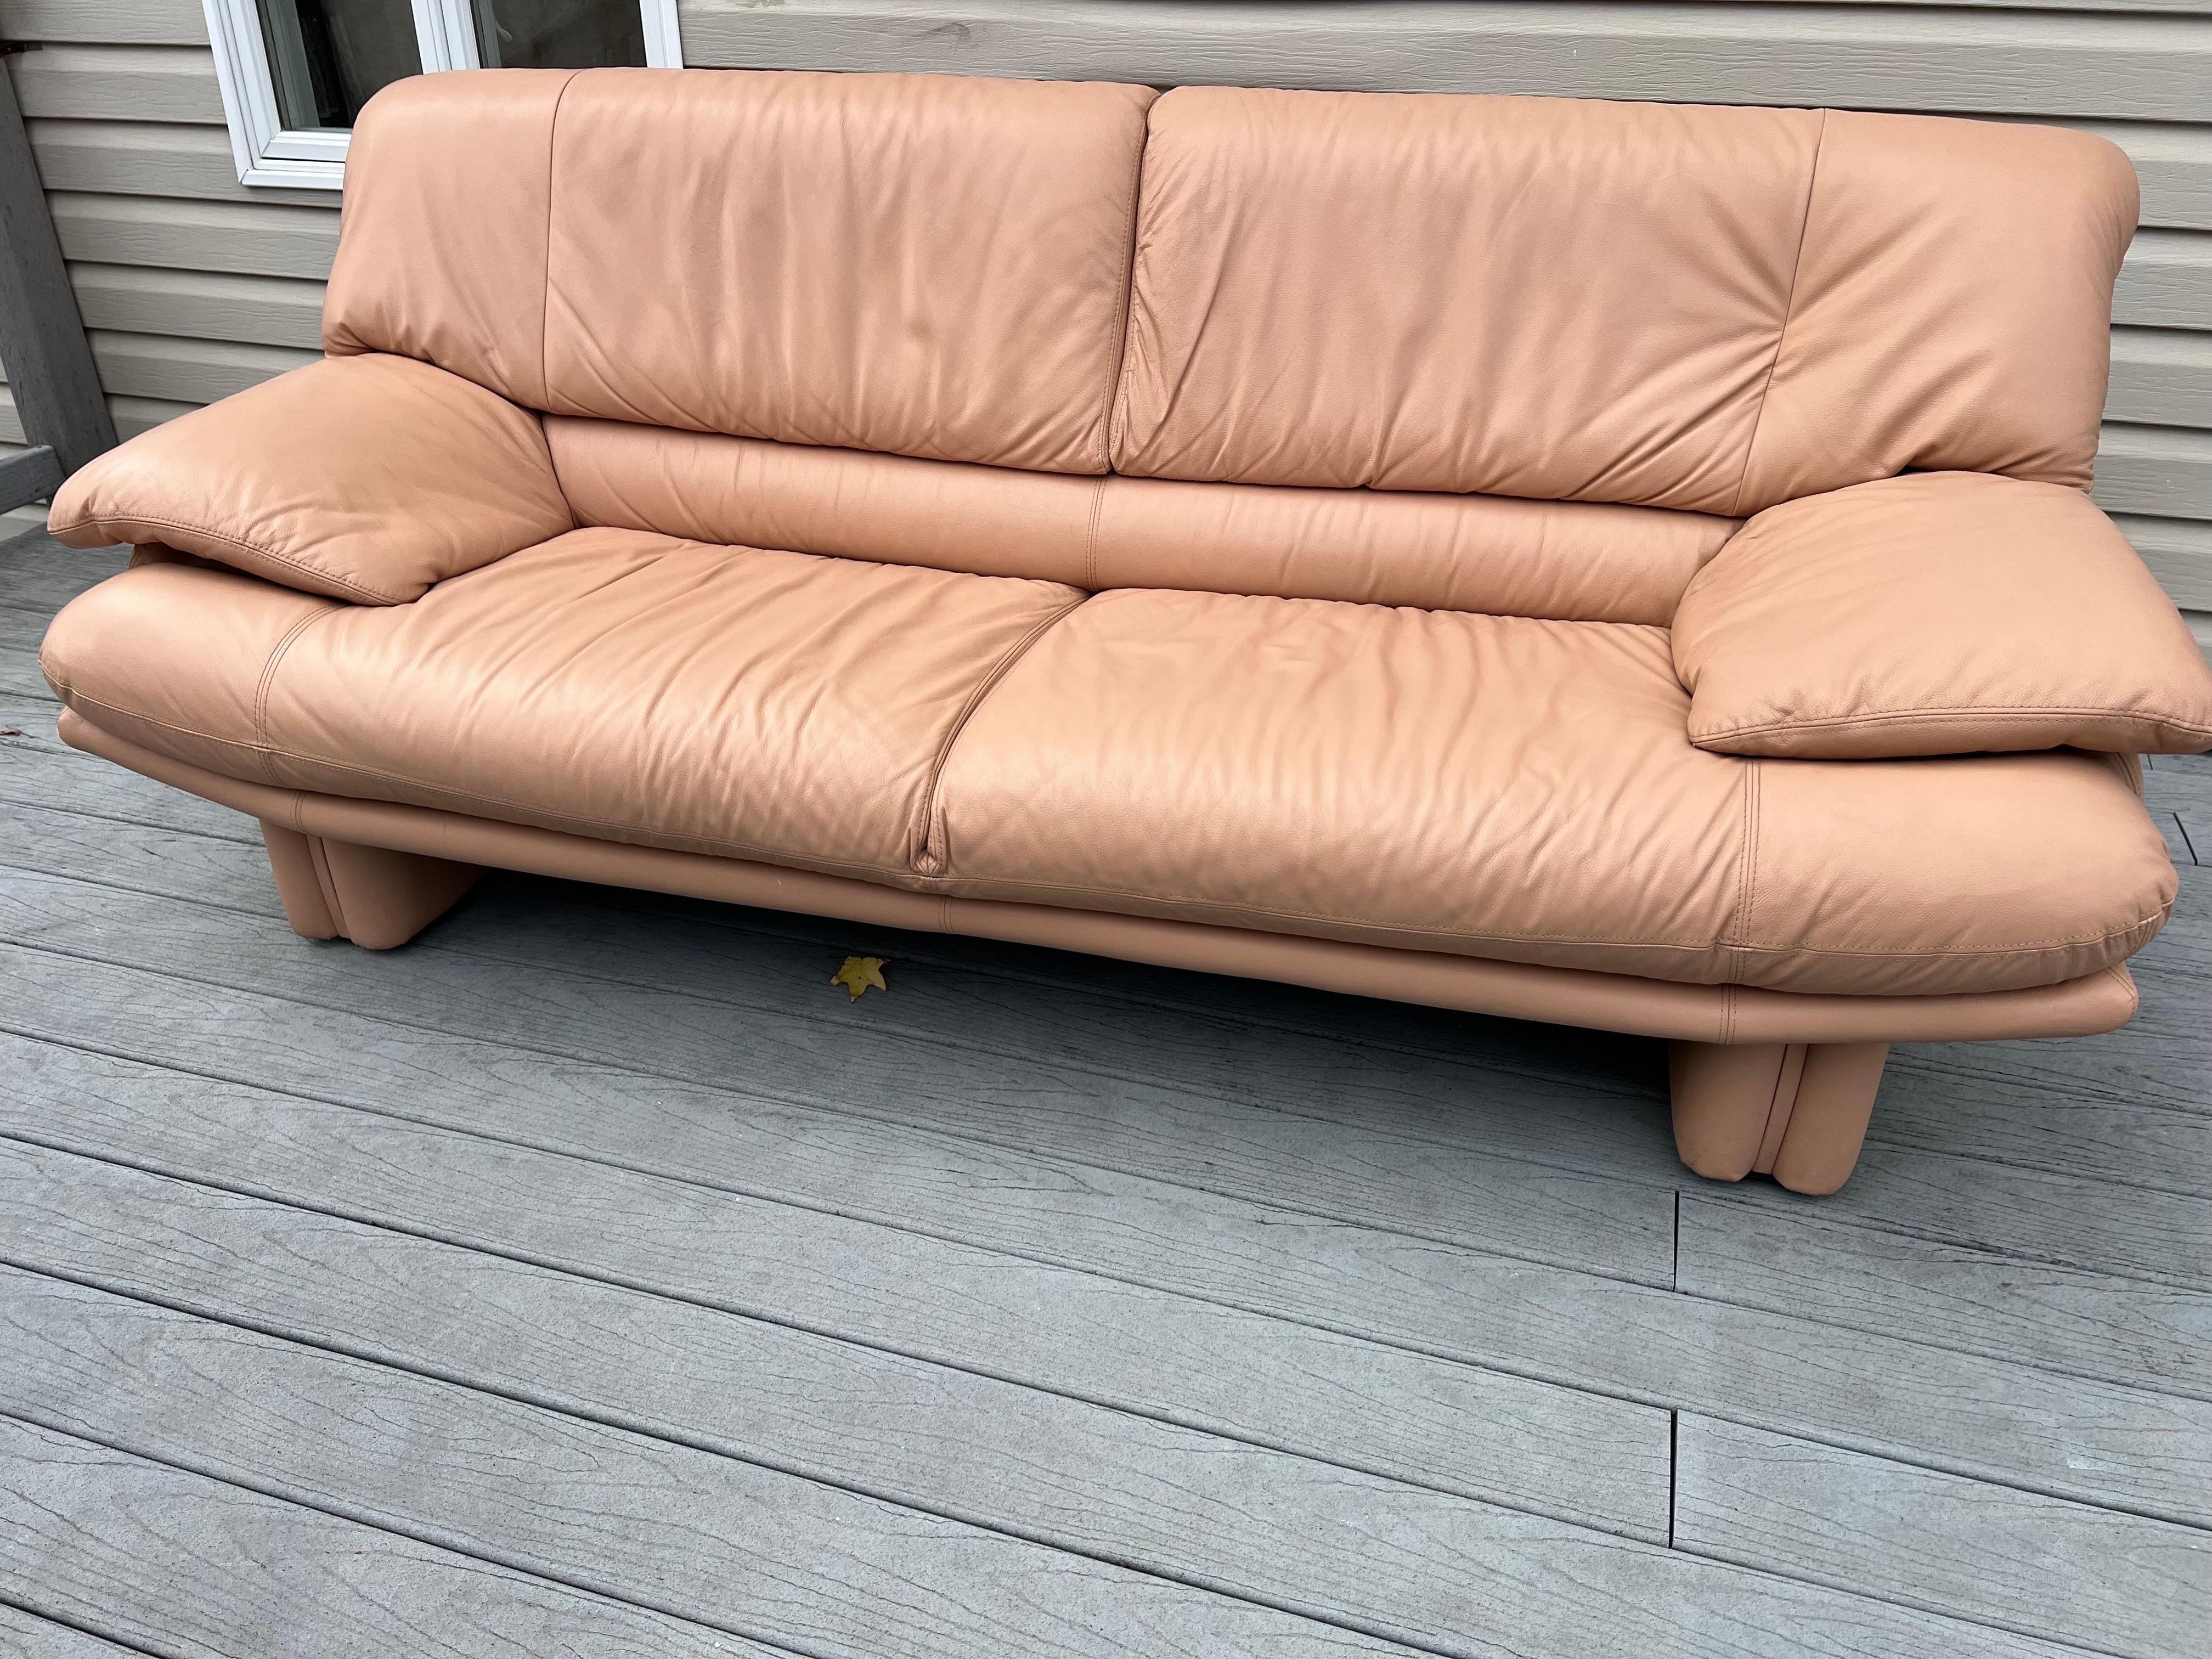 Postmodern Peach Leather Sofa very comfortable and easy to clean. In beautiful vintage condition. Please check all of the photos for the condition 